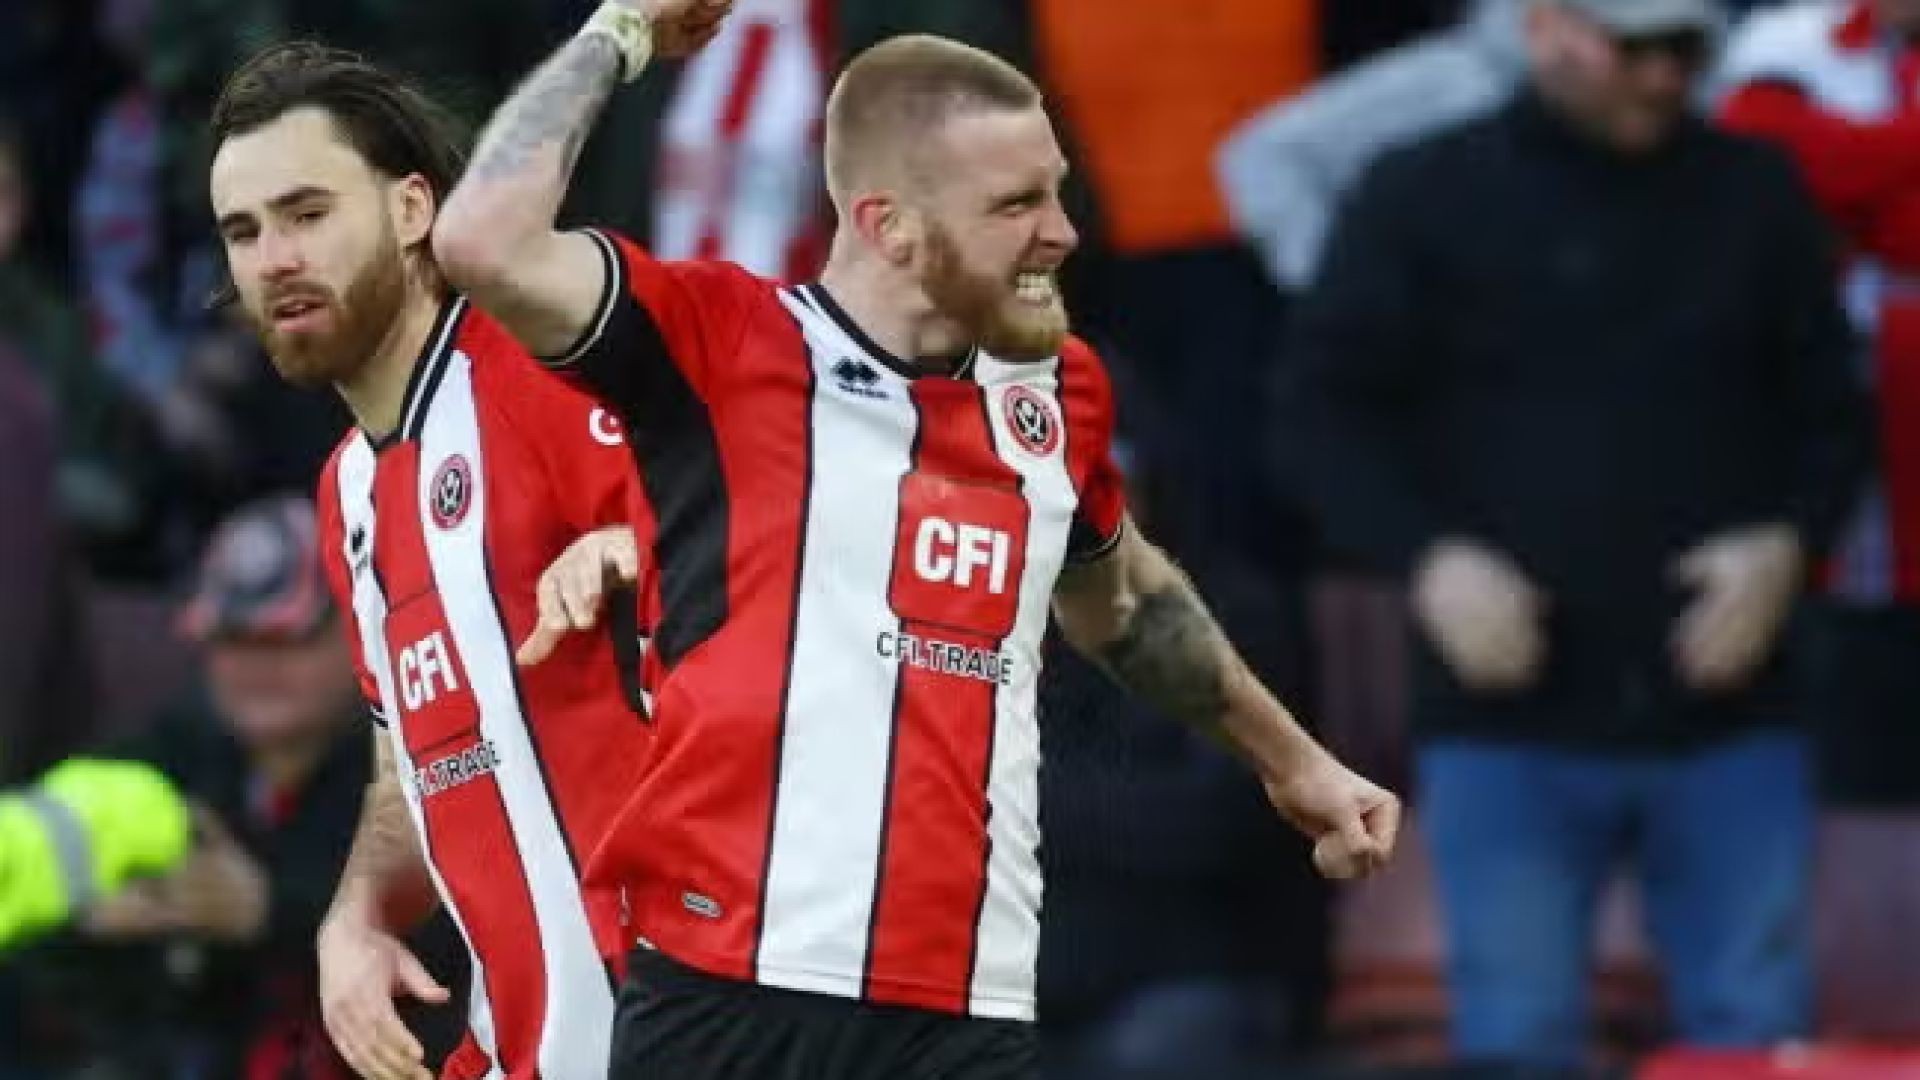 Sheffield United vs Chelsea: Can the Blades Blunt the Blues? (Full Match Replay & Highlights)